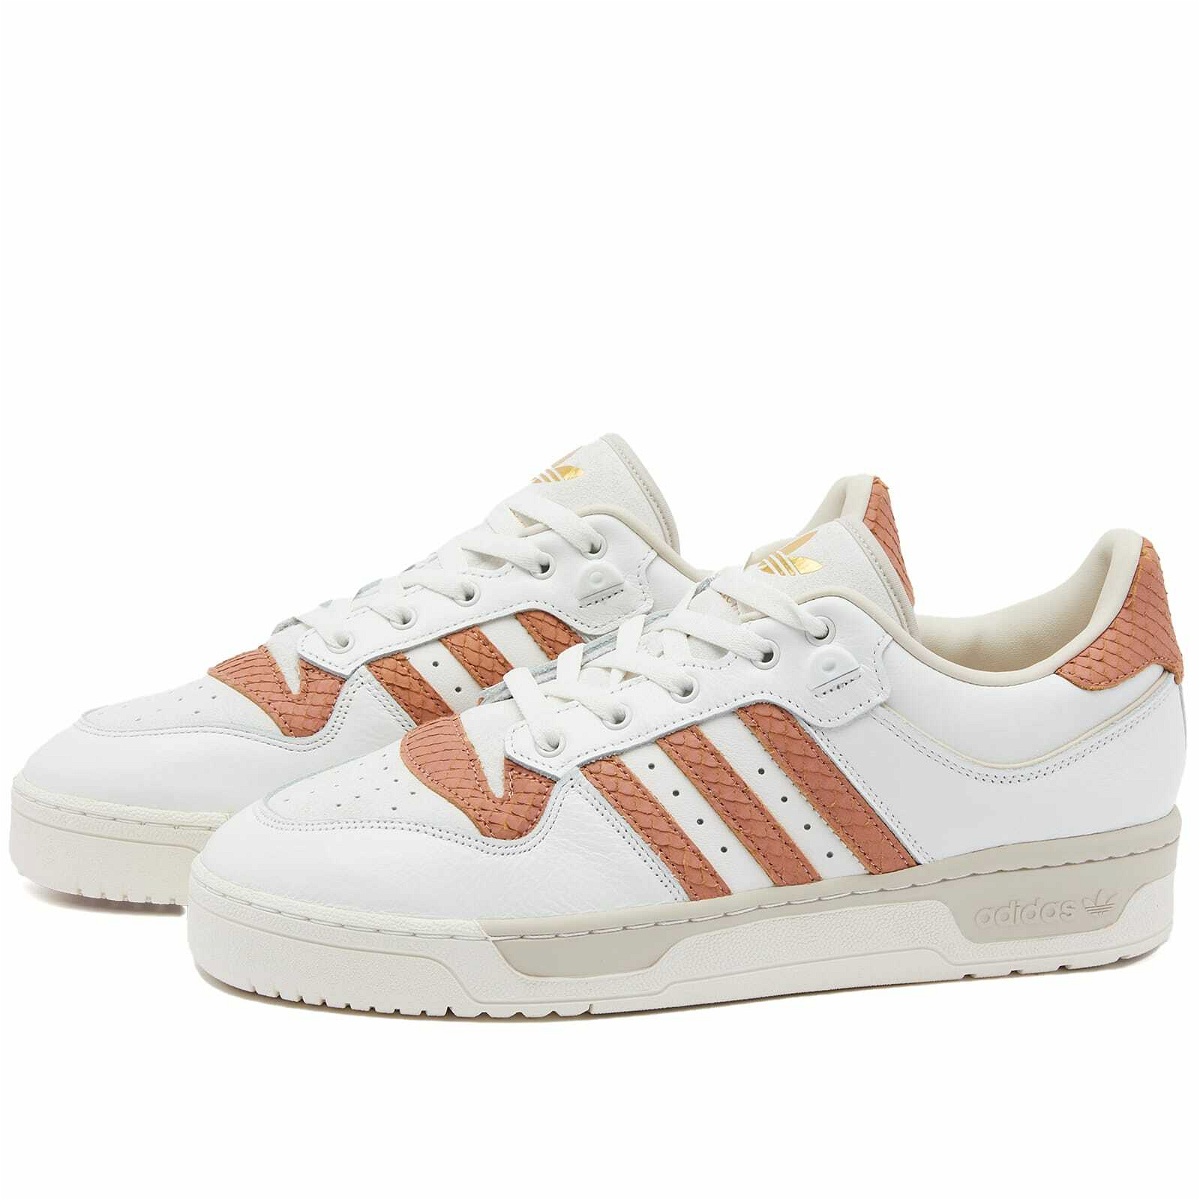 Adidas Rivalry Low 86 Sneakers in Core White/Clay Strata adidas